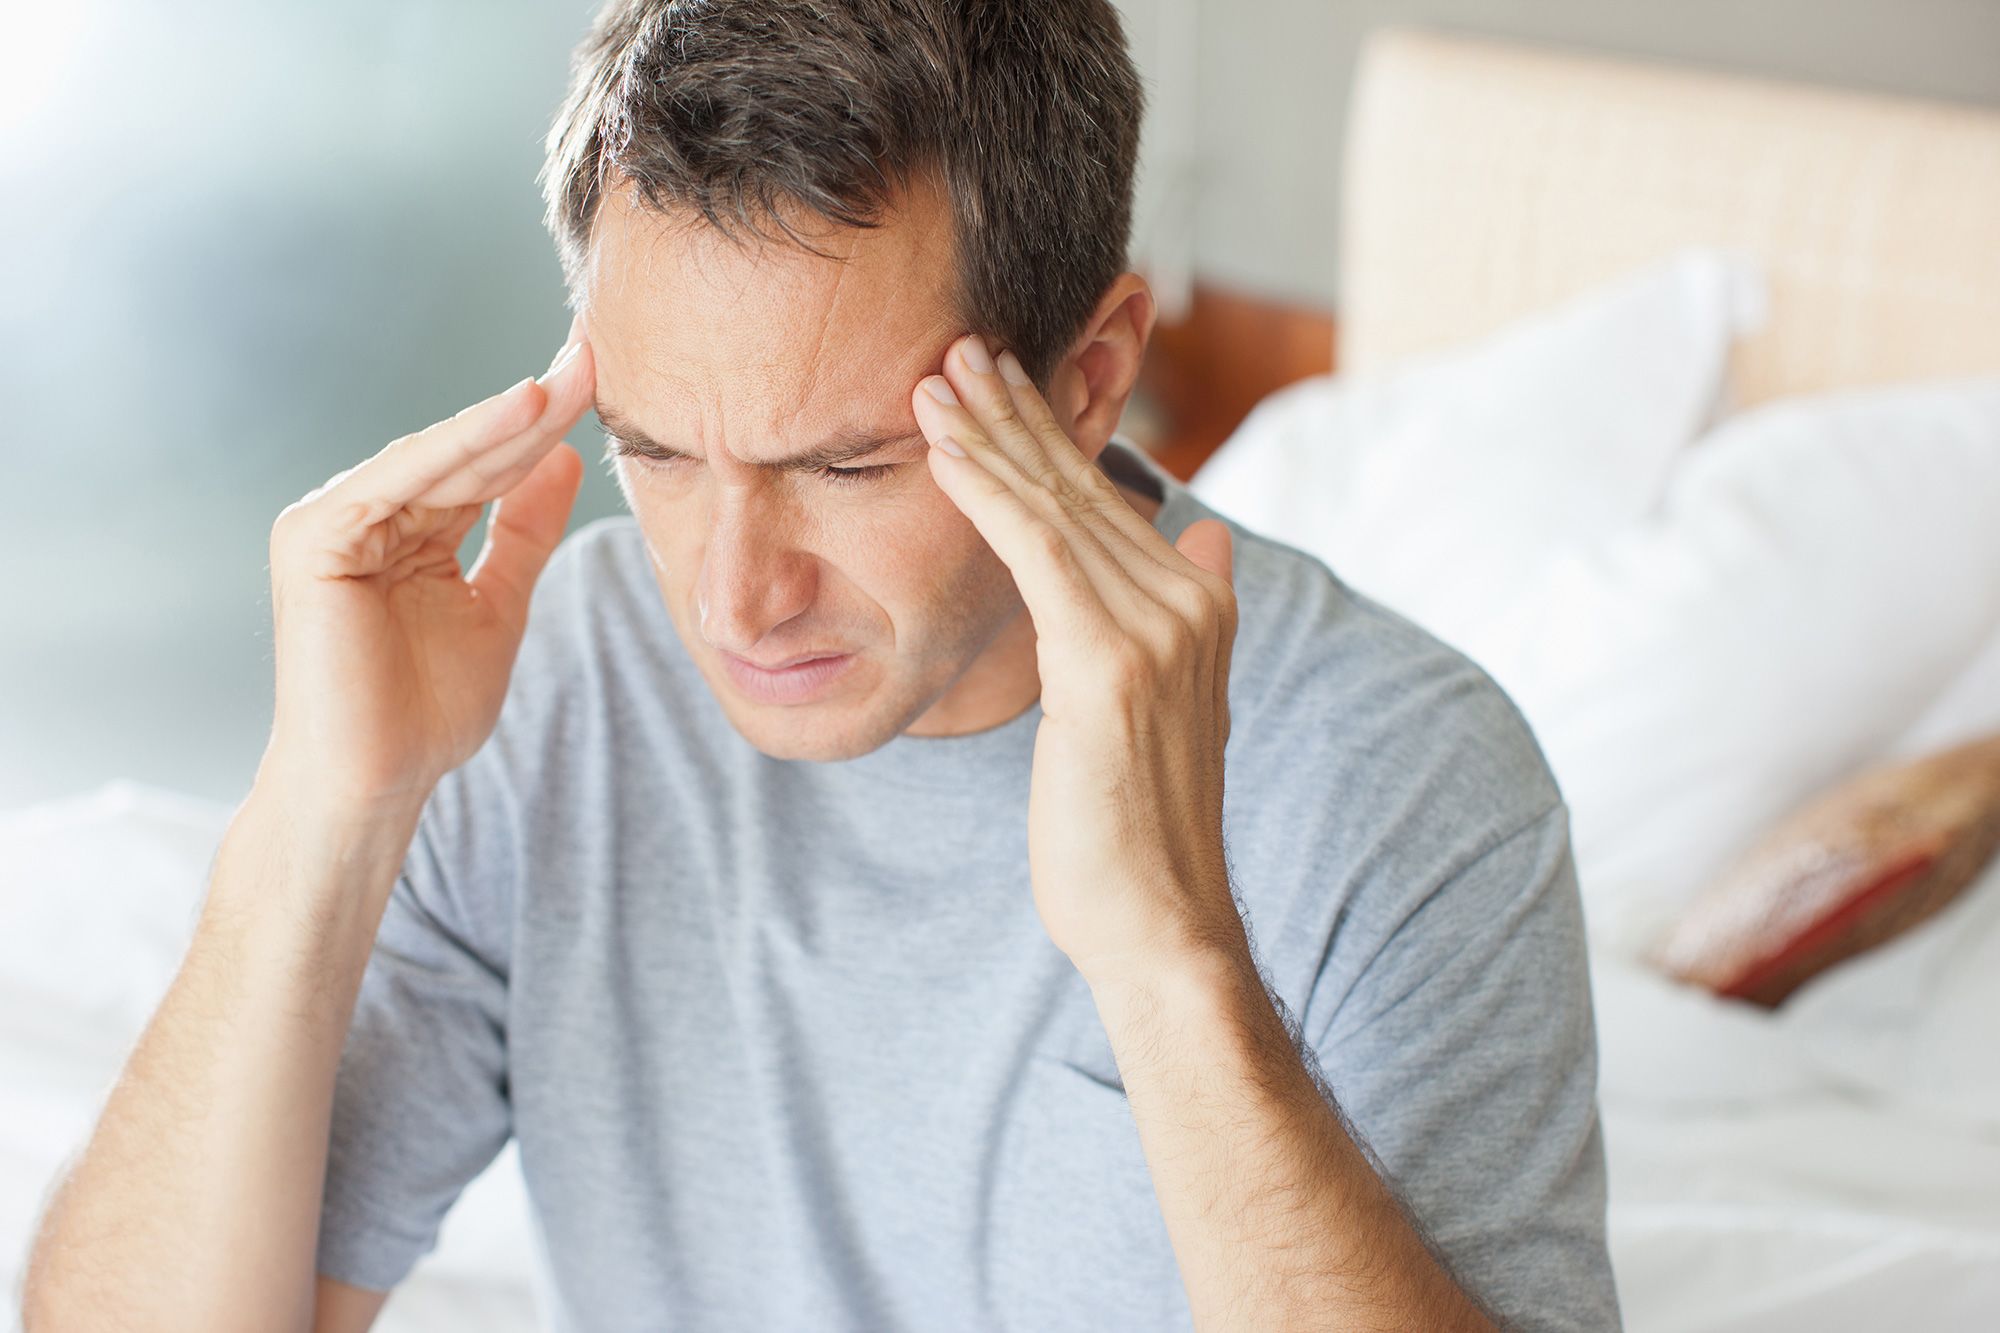 FDA approves new Eli Lilly drug to ‘resolve’ migraine ache in two hours